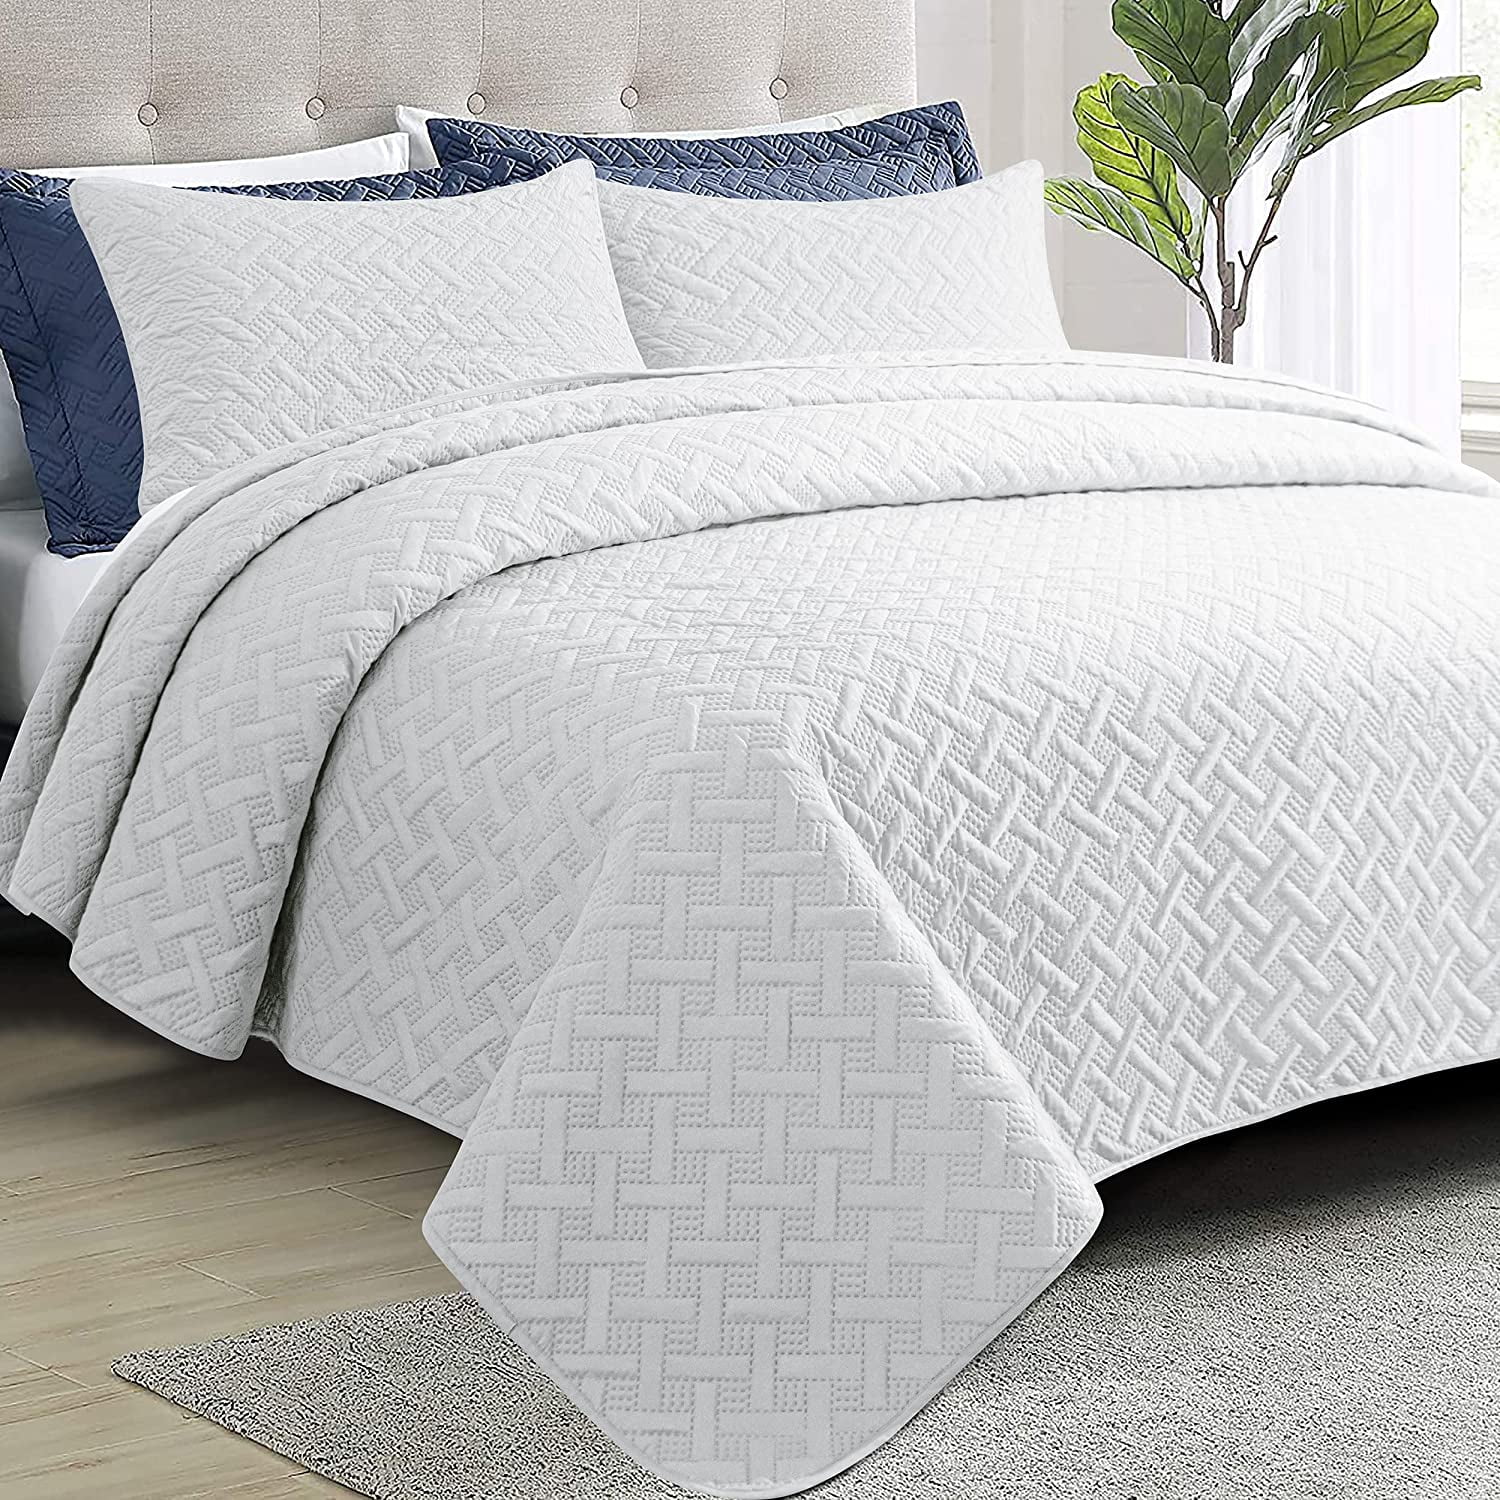 Grey Plain 3 Piece Quilted Bedspread Bed Throw & Two Pillow Shams Double King 